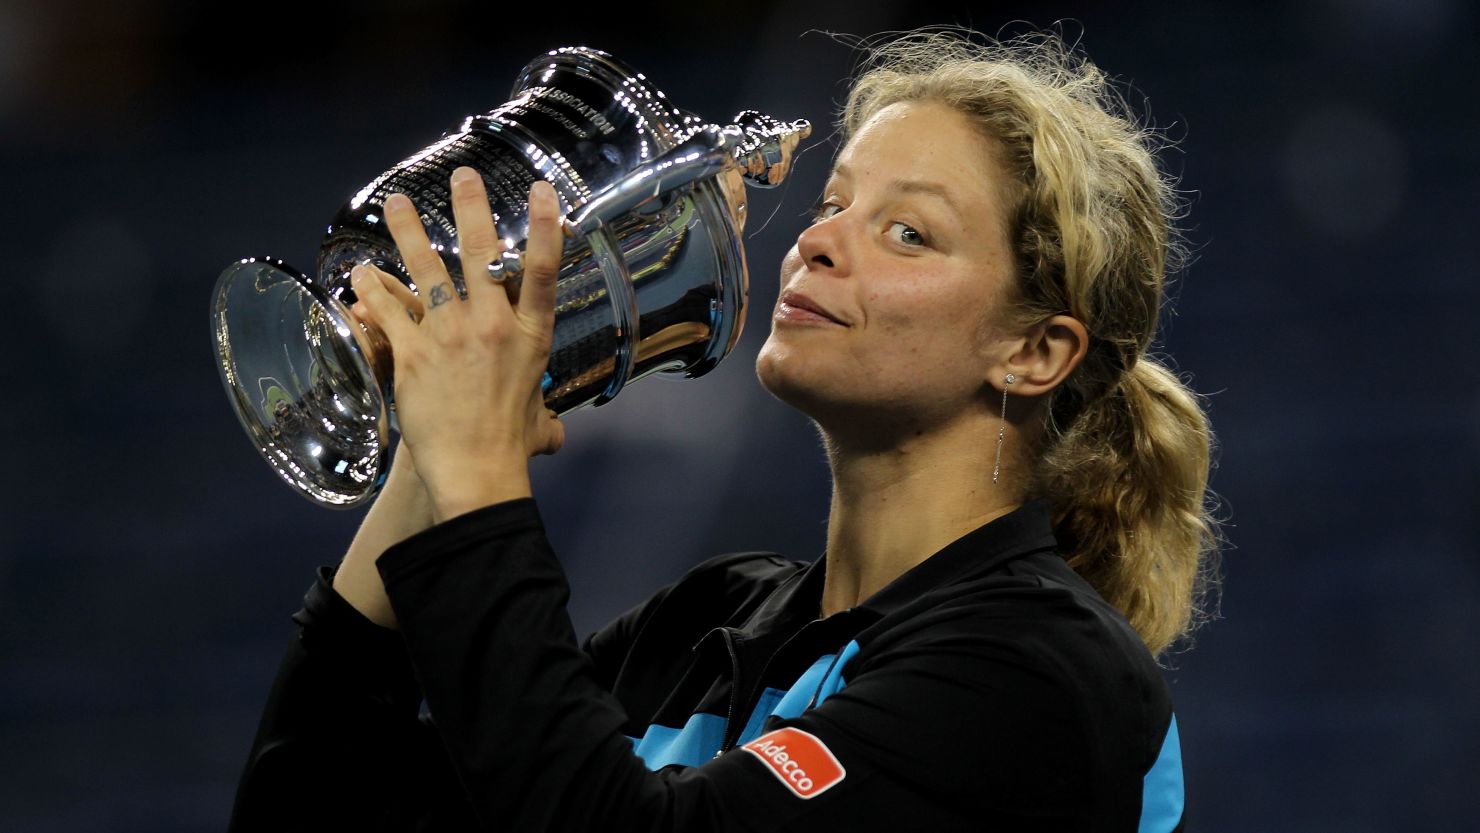 Belgian Kim Clijsters has won three of her four career grand slam titles at the U.S. Open in New York